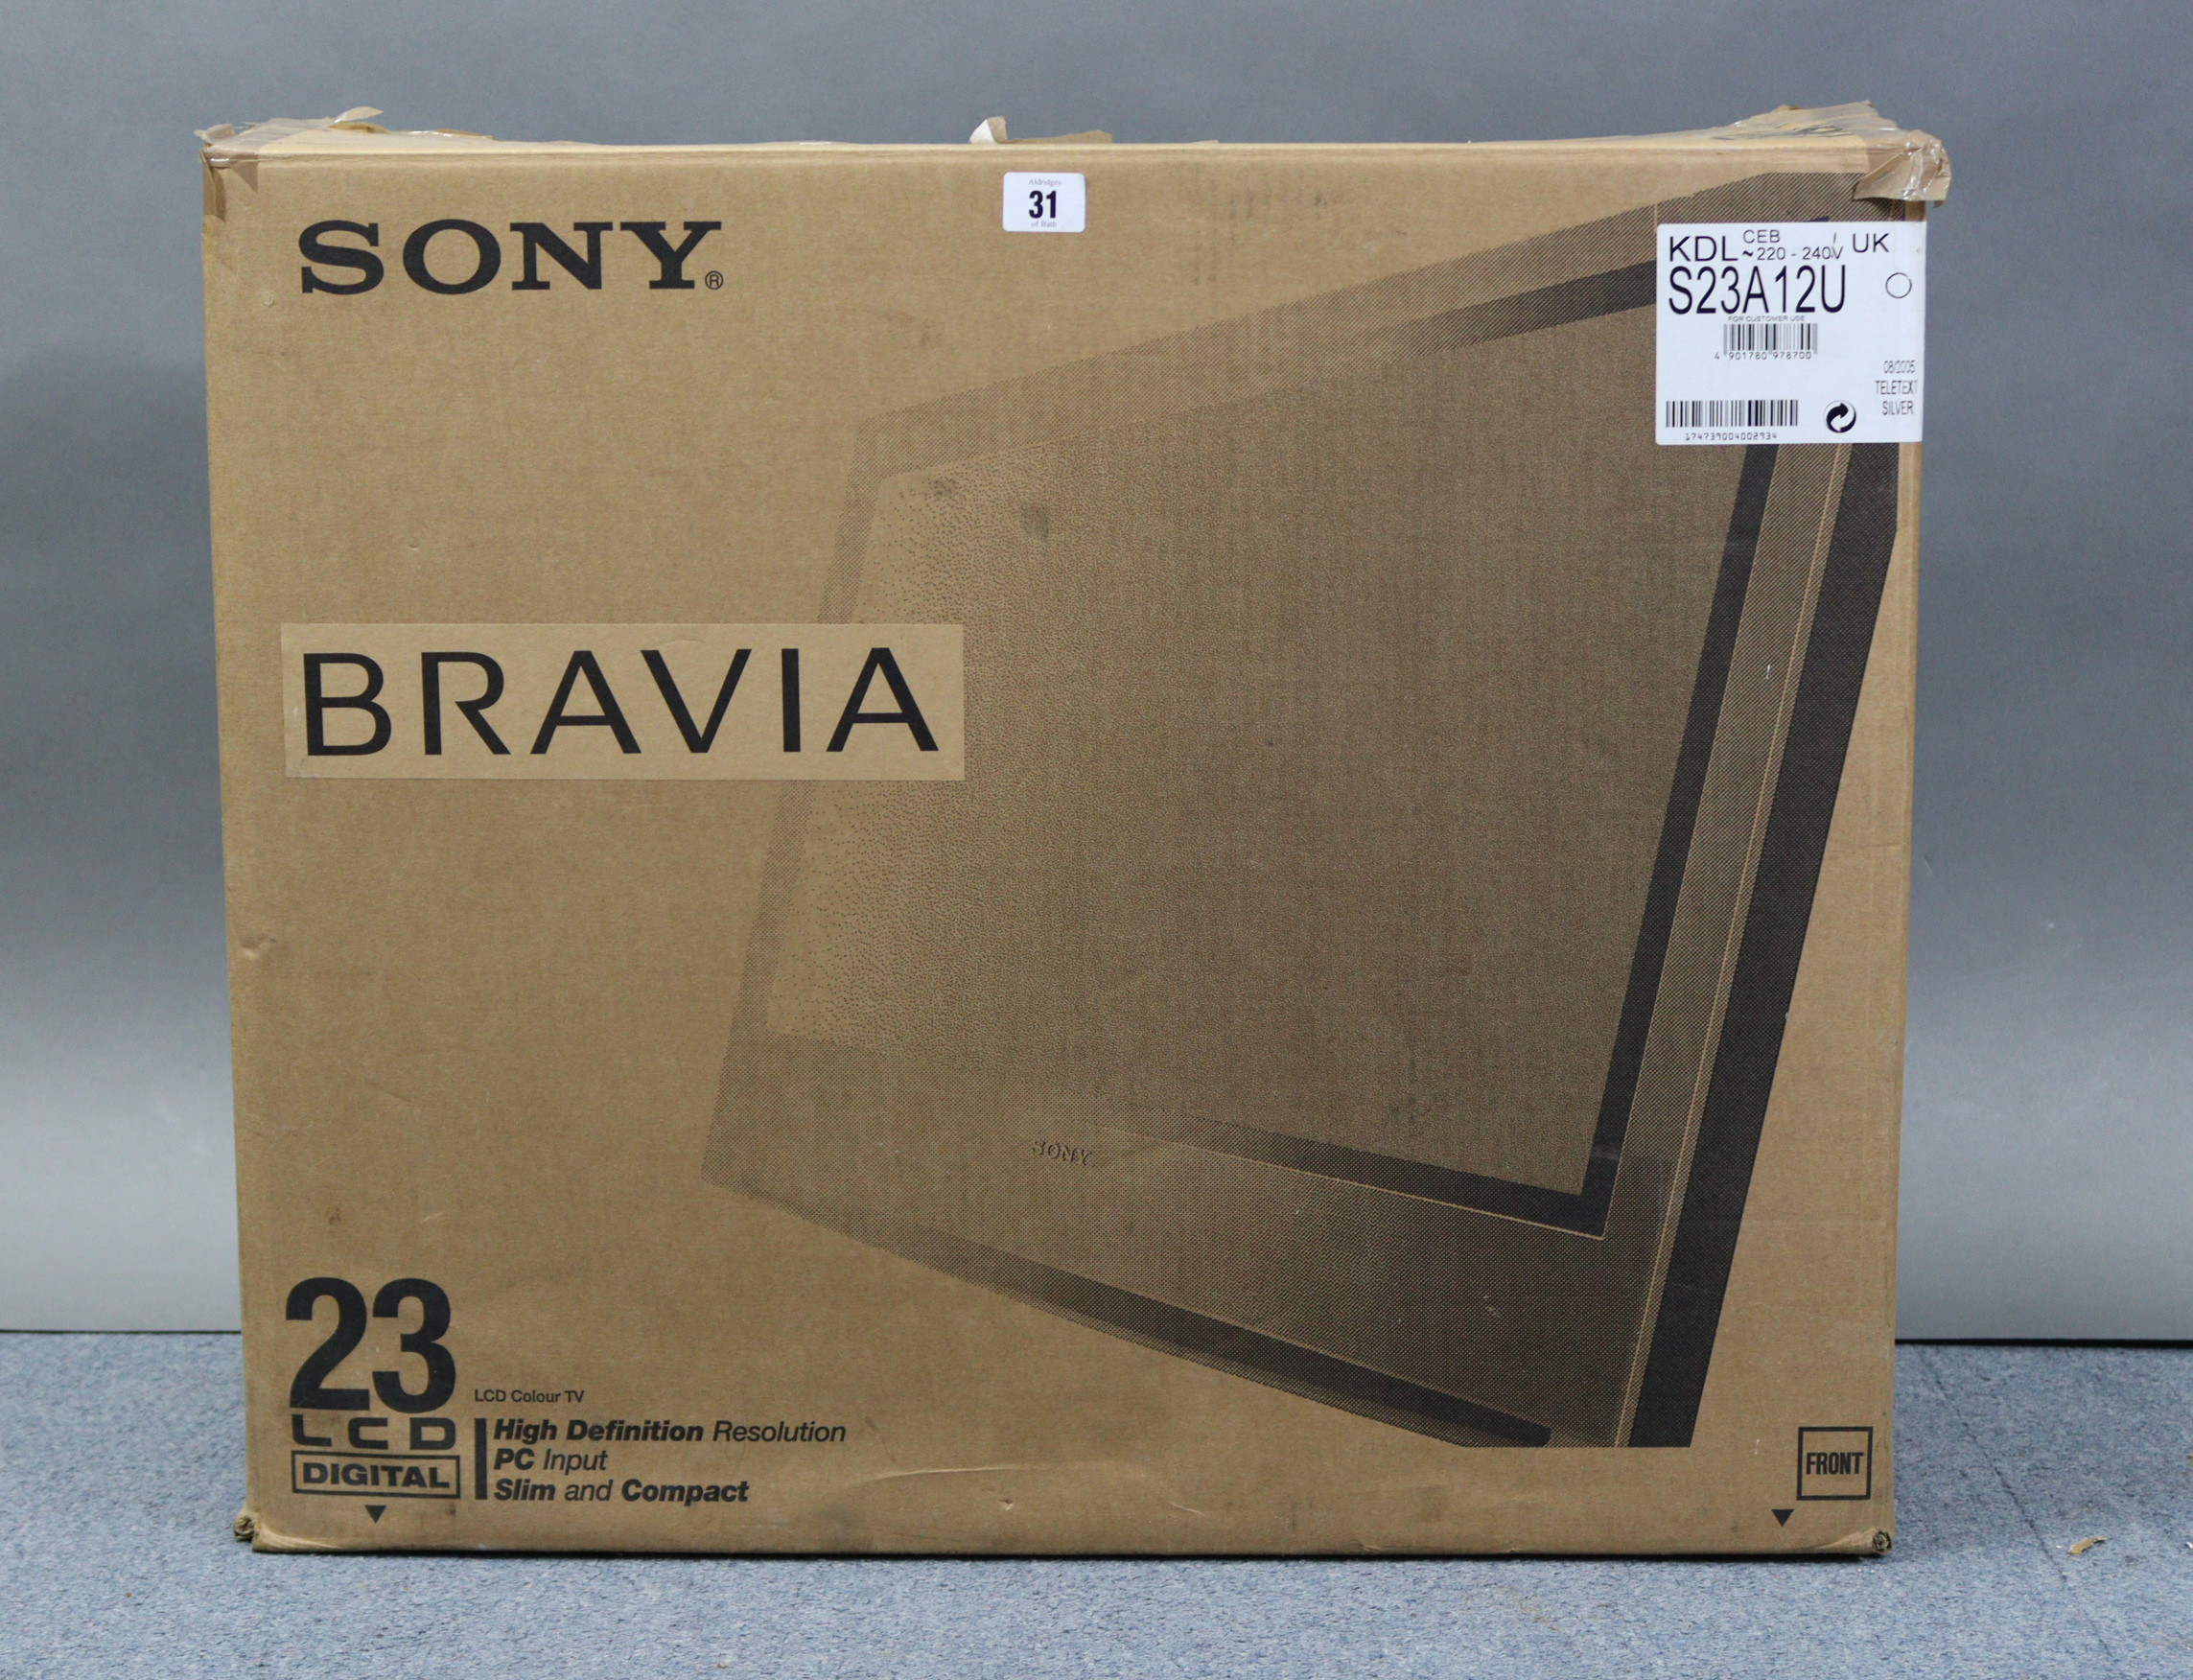 A Sony “Bravia” 23” LCD television with remote control, boxed, w.o. - Image 3 of 3